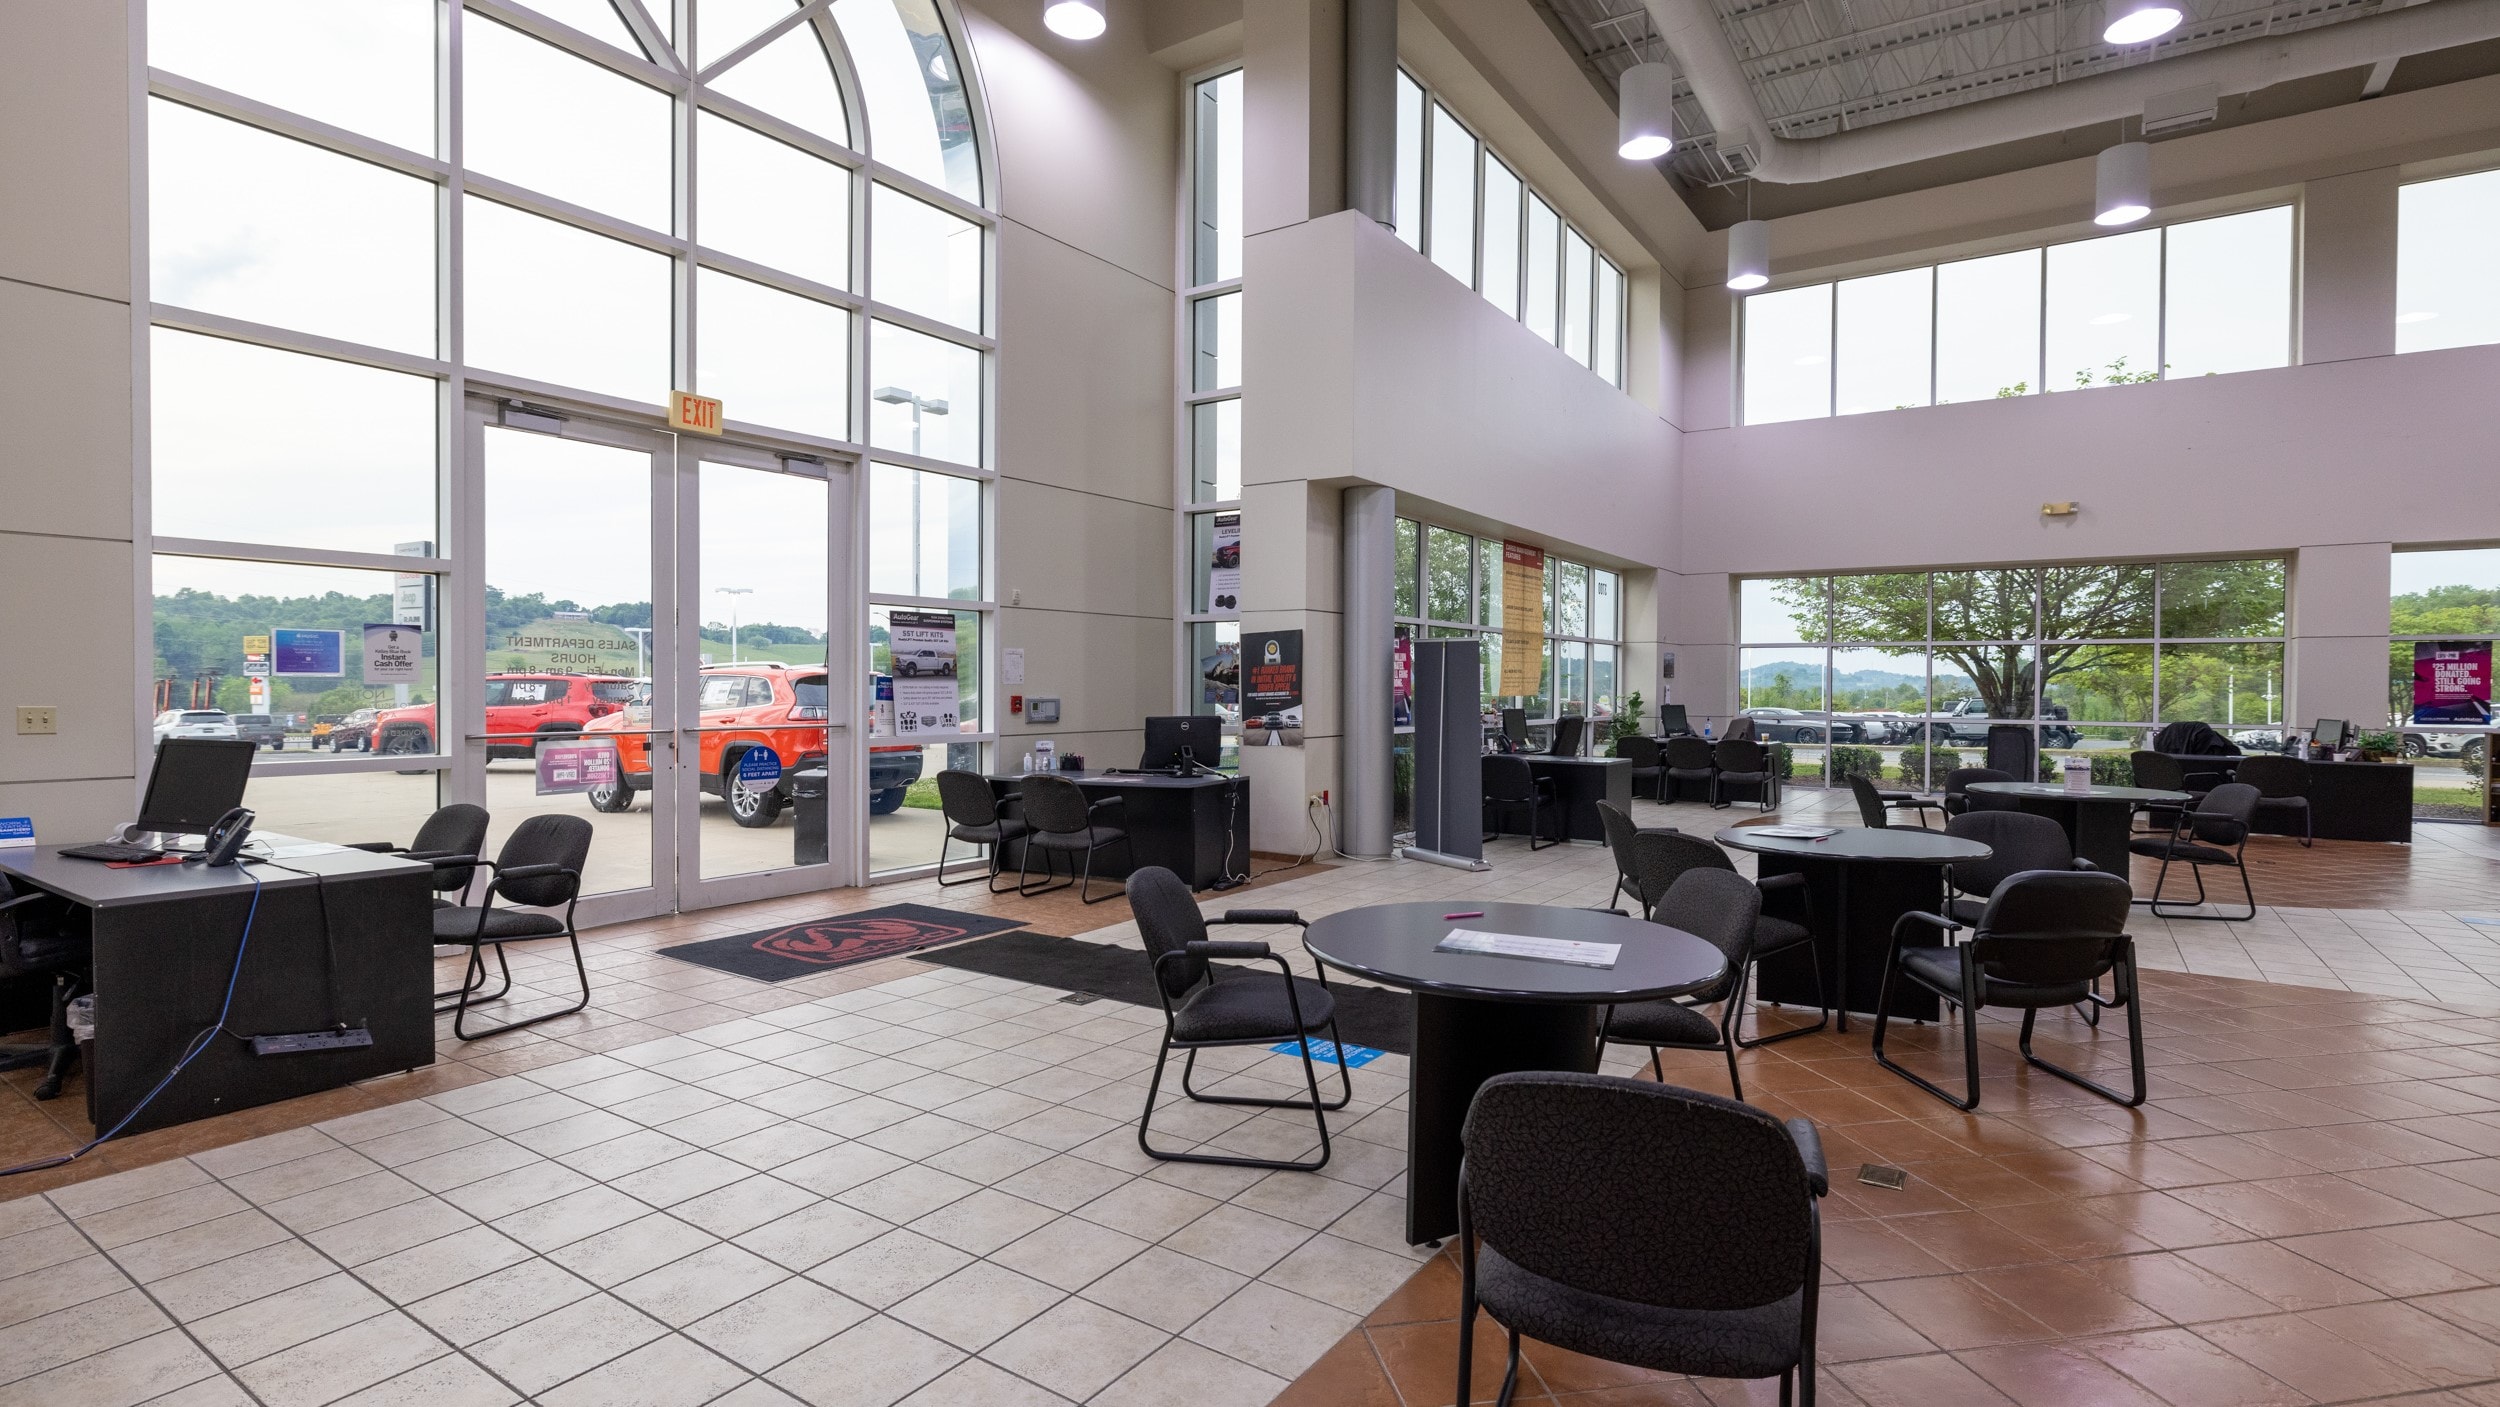 Lobby of AutoNation Chrysler Dodge Jeep Ram & FIAT Johnson City photo of several round tables surrounded by chairs